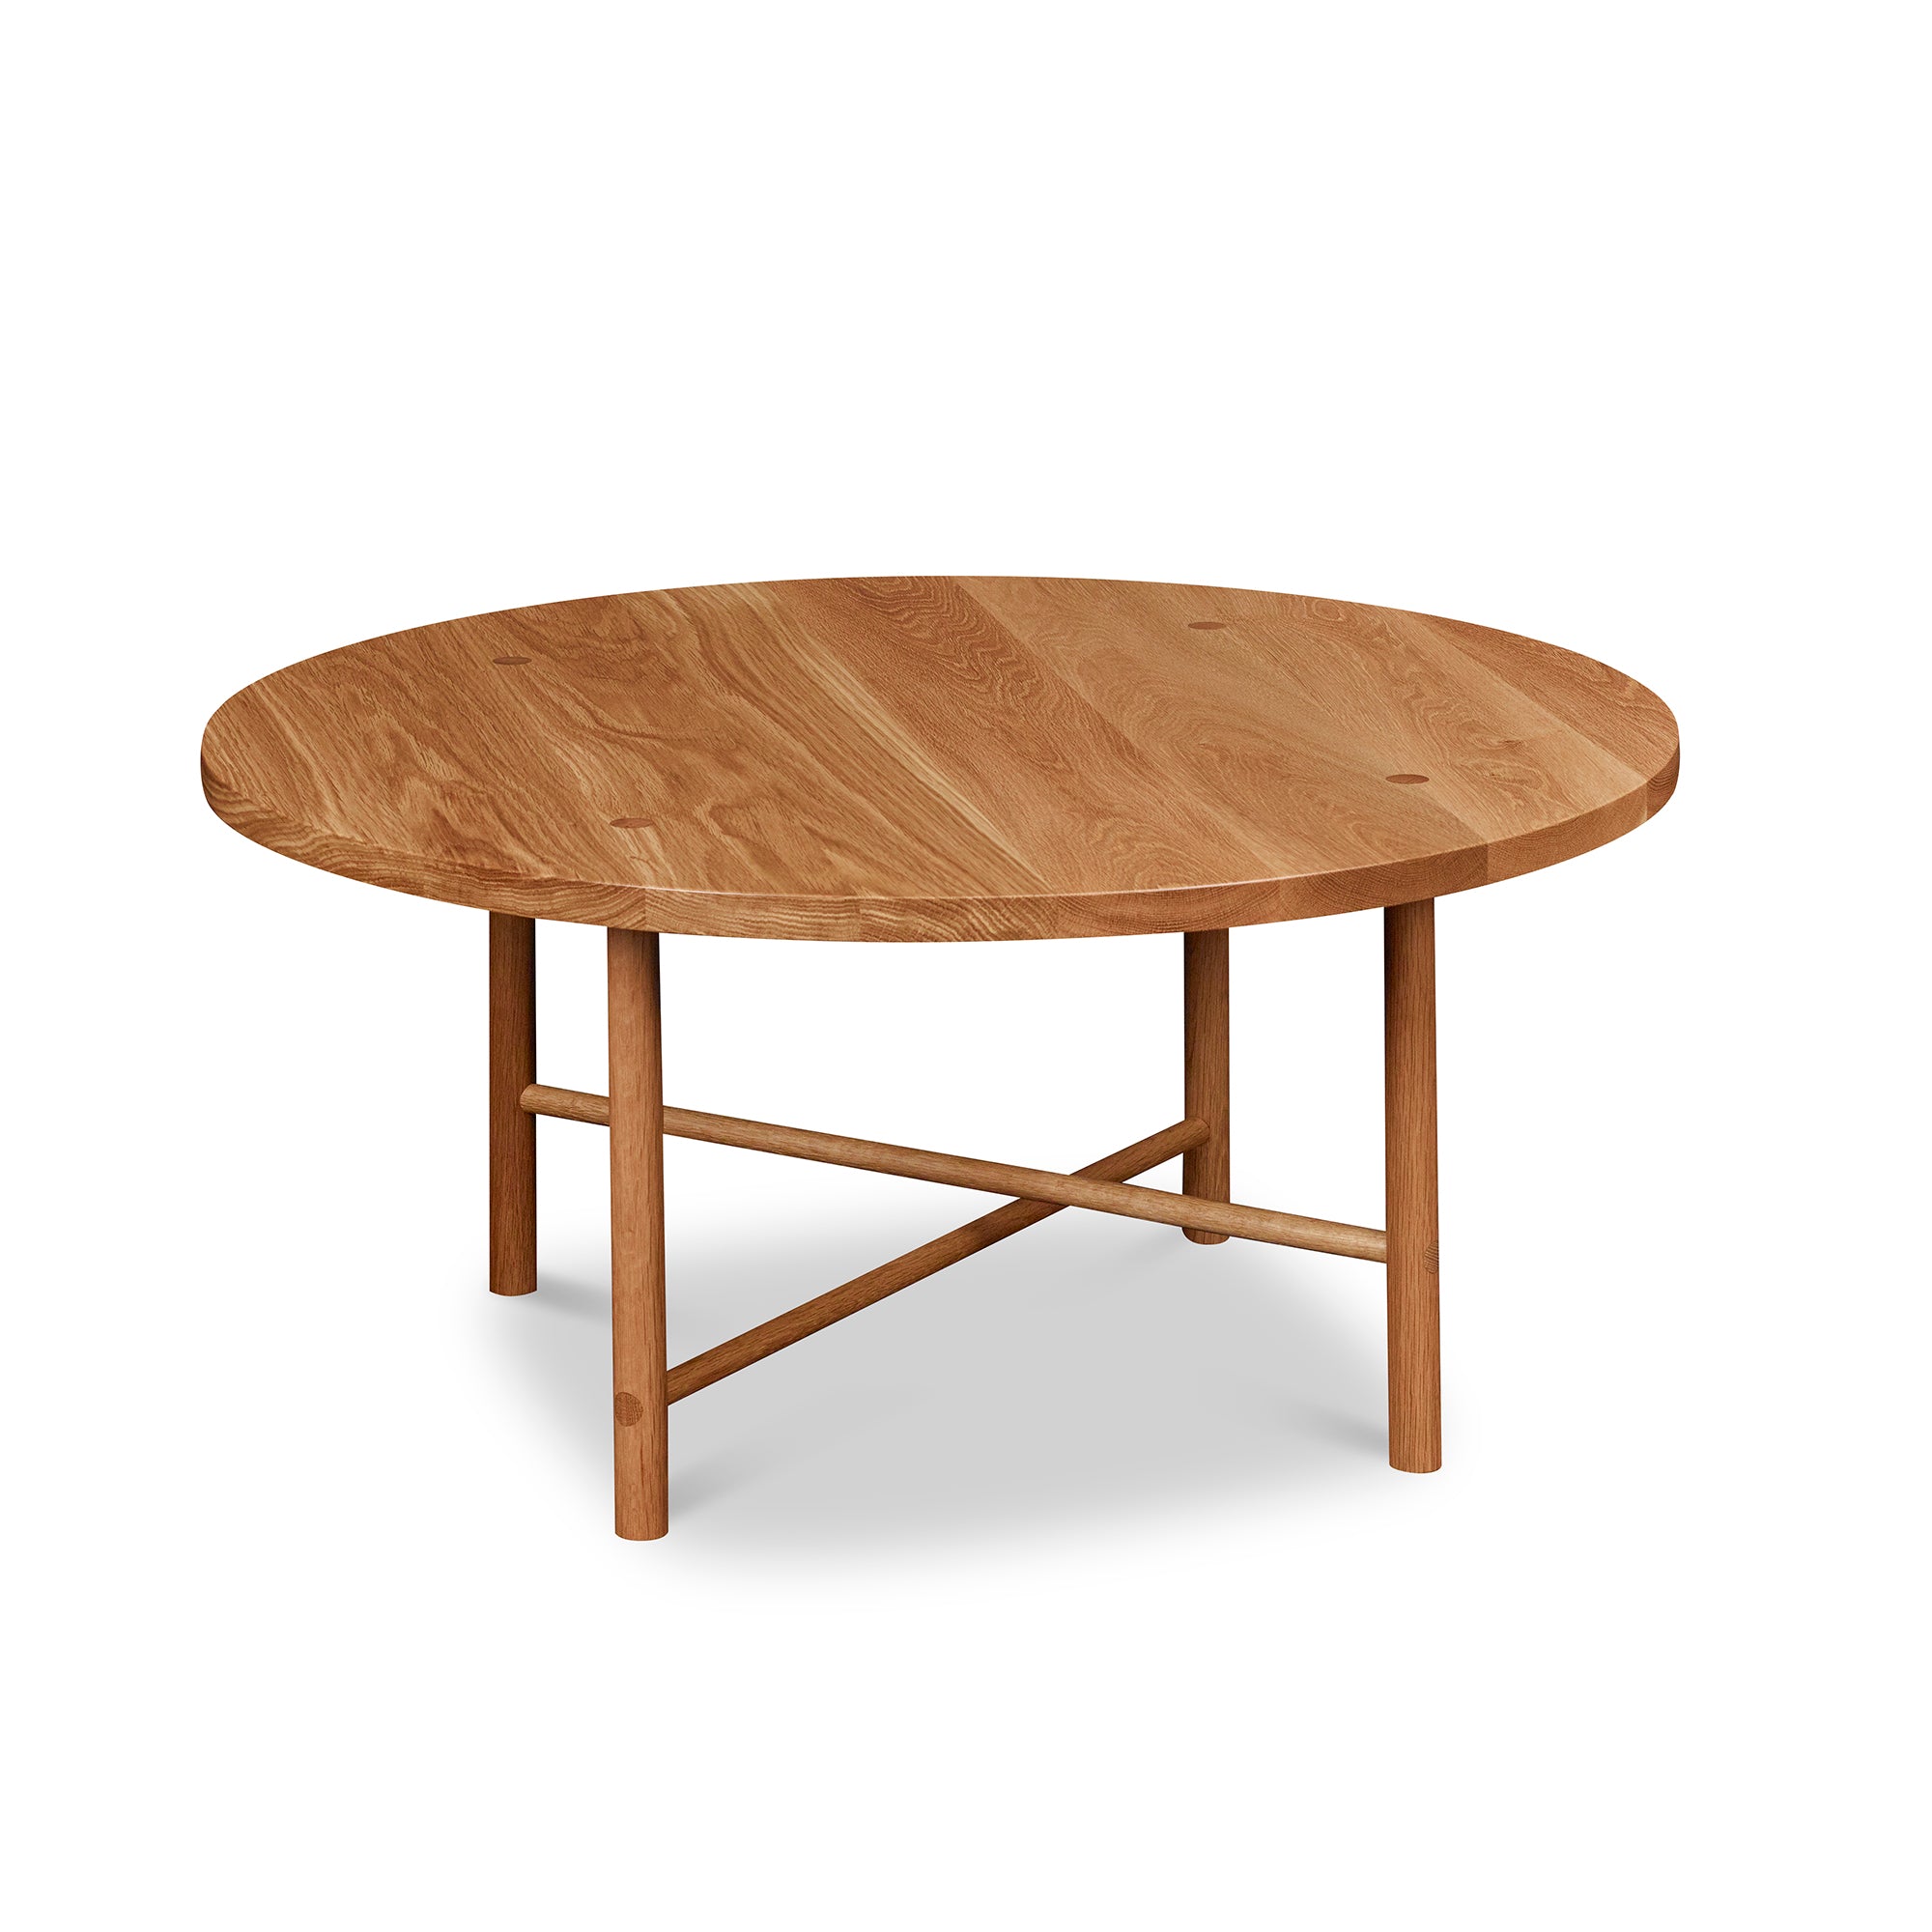 Round Scandinavian style coffee table with round legs in white oak